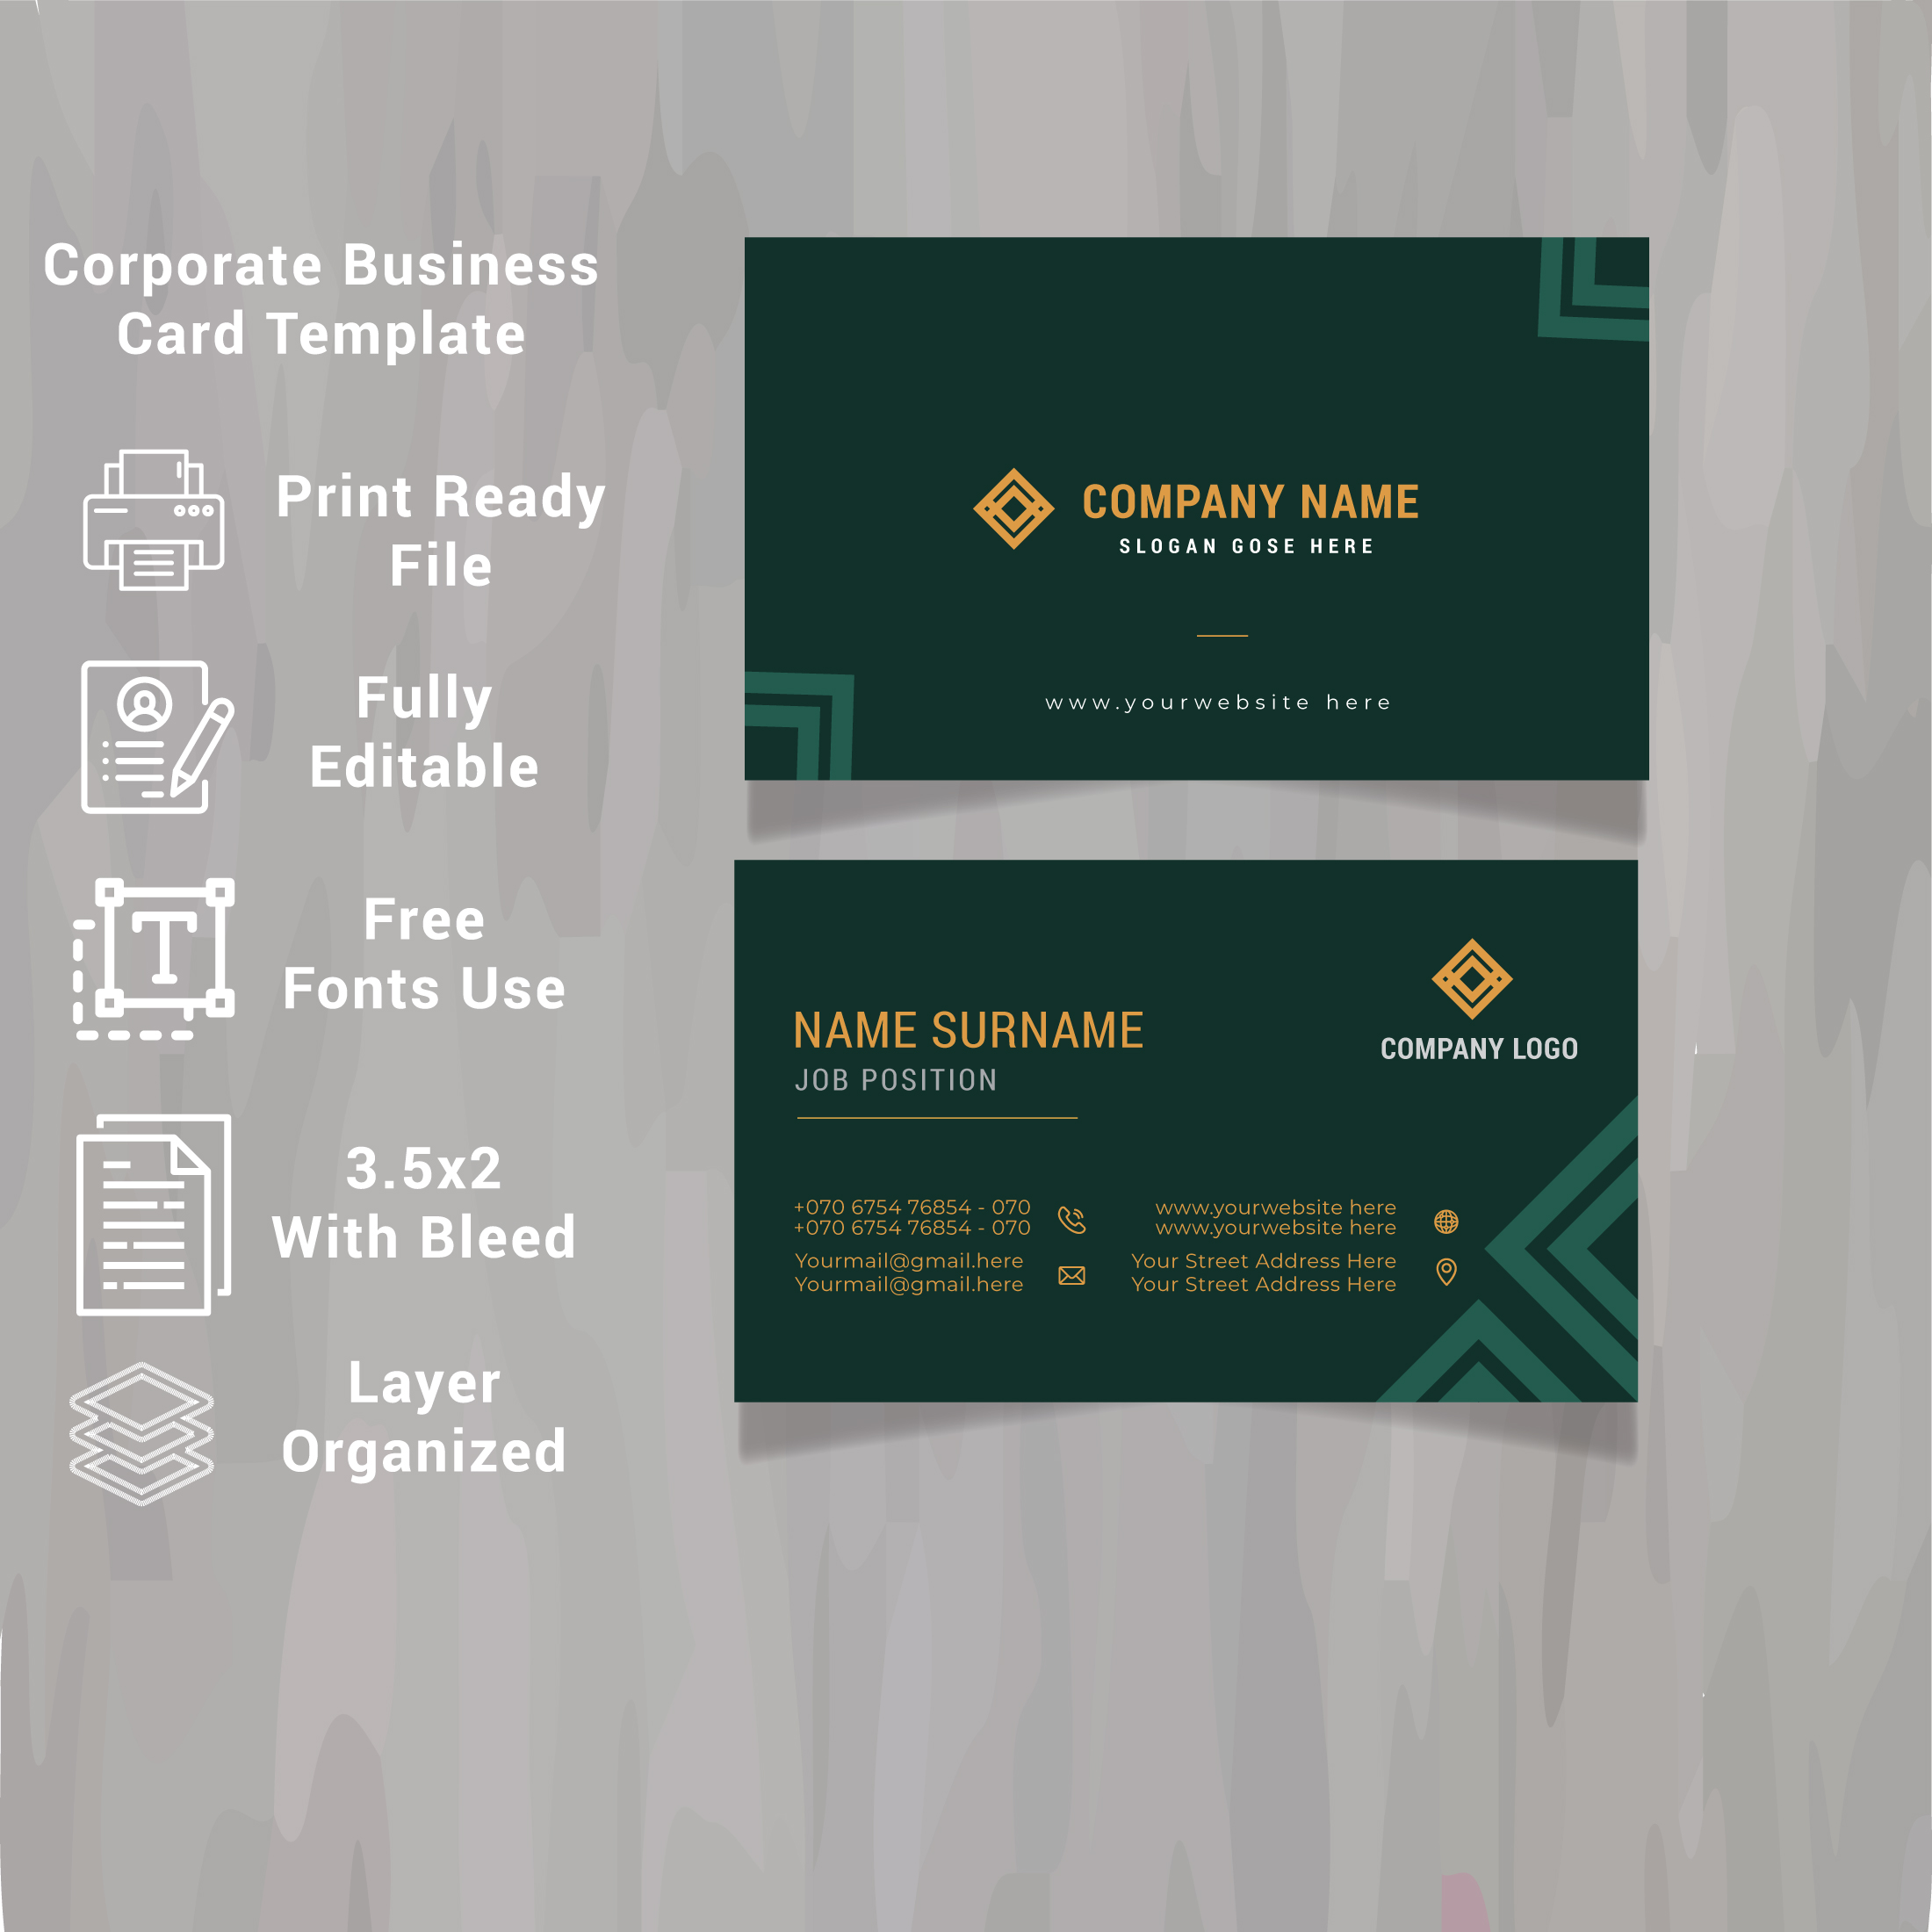 A business card with a green and gold design.